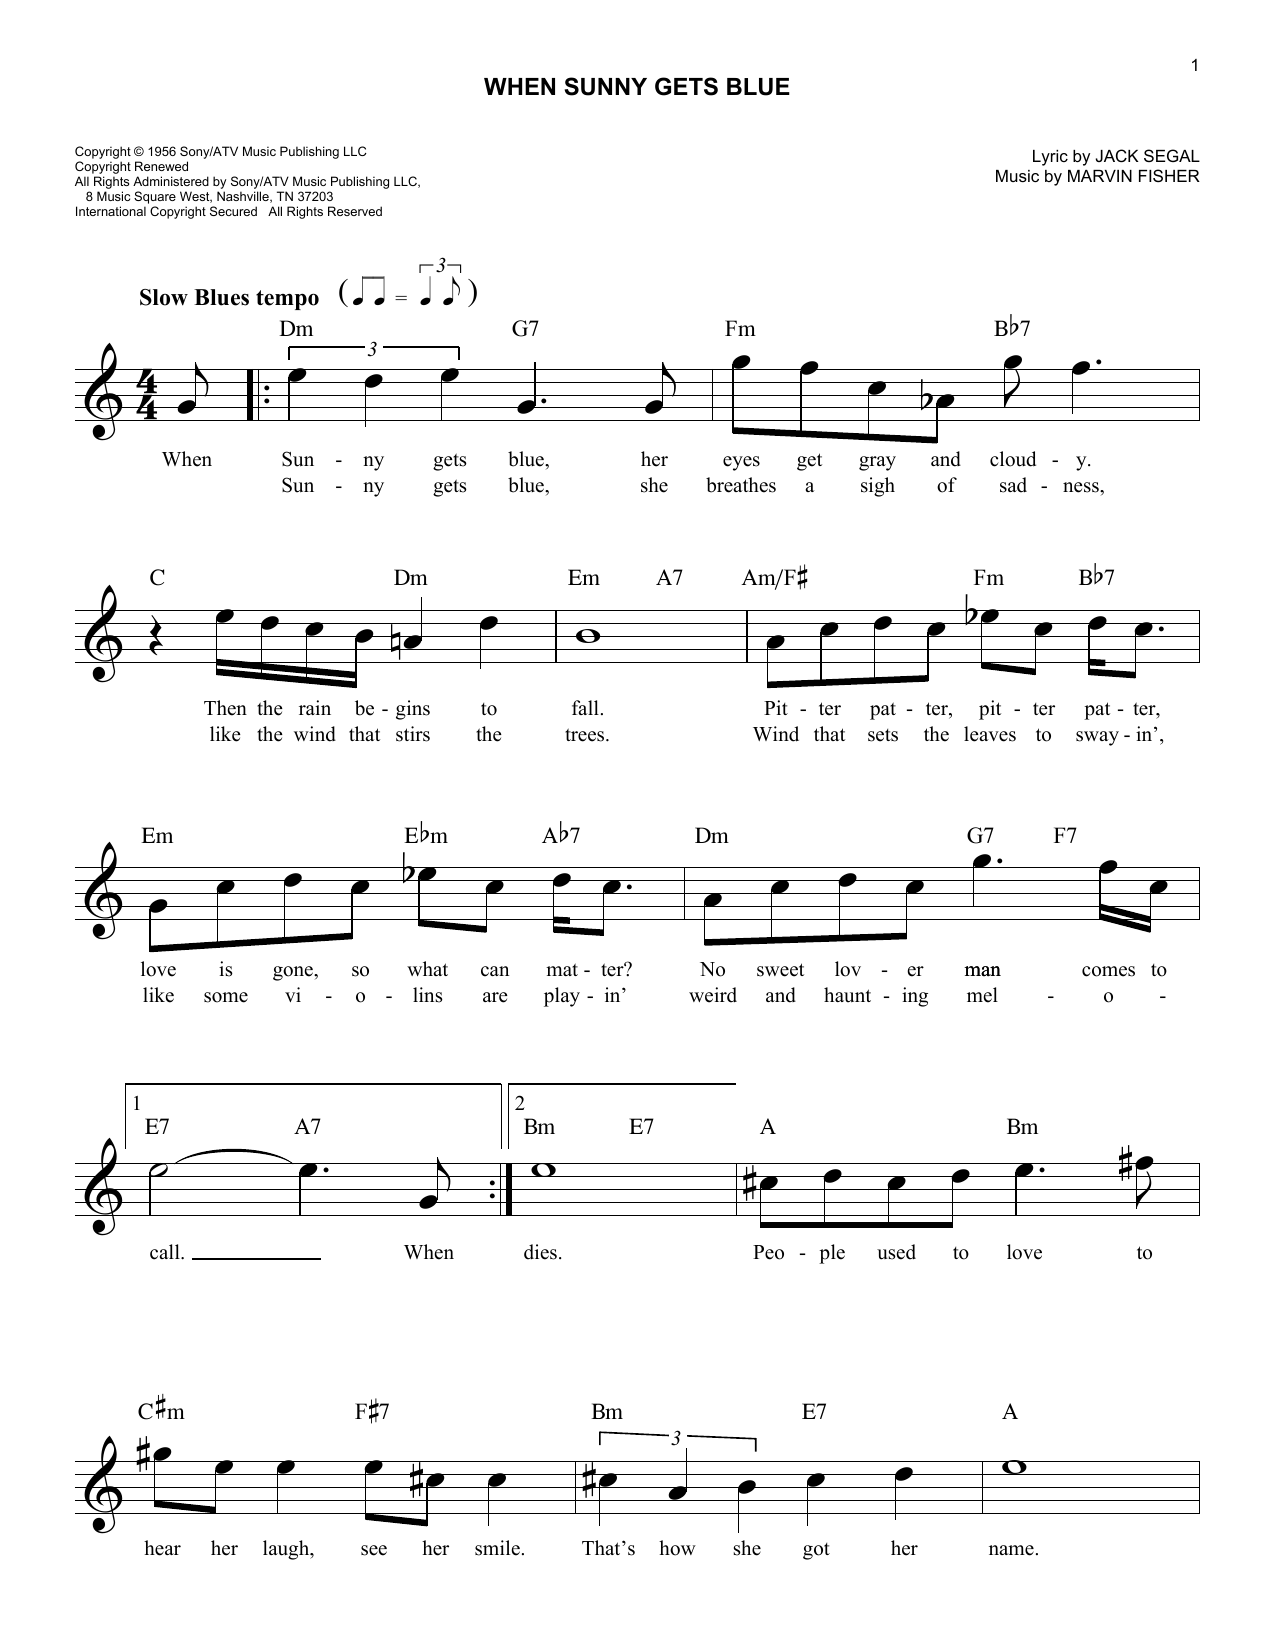 Marvin Fisher When Sunny Gets Blue sheet music notes and chords. Download Printable PDF.